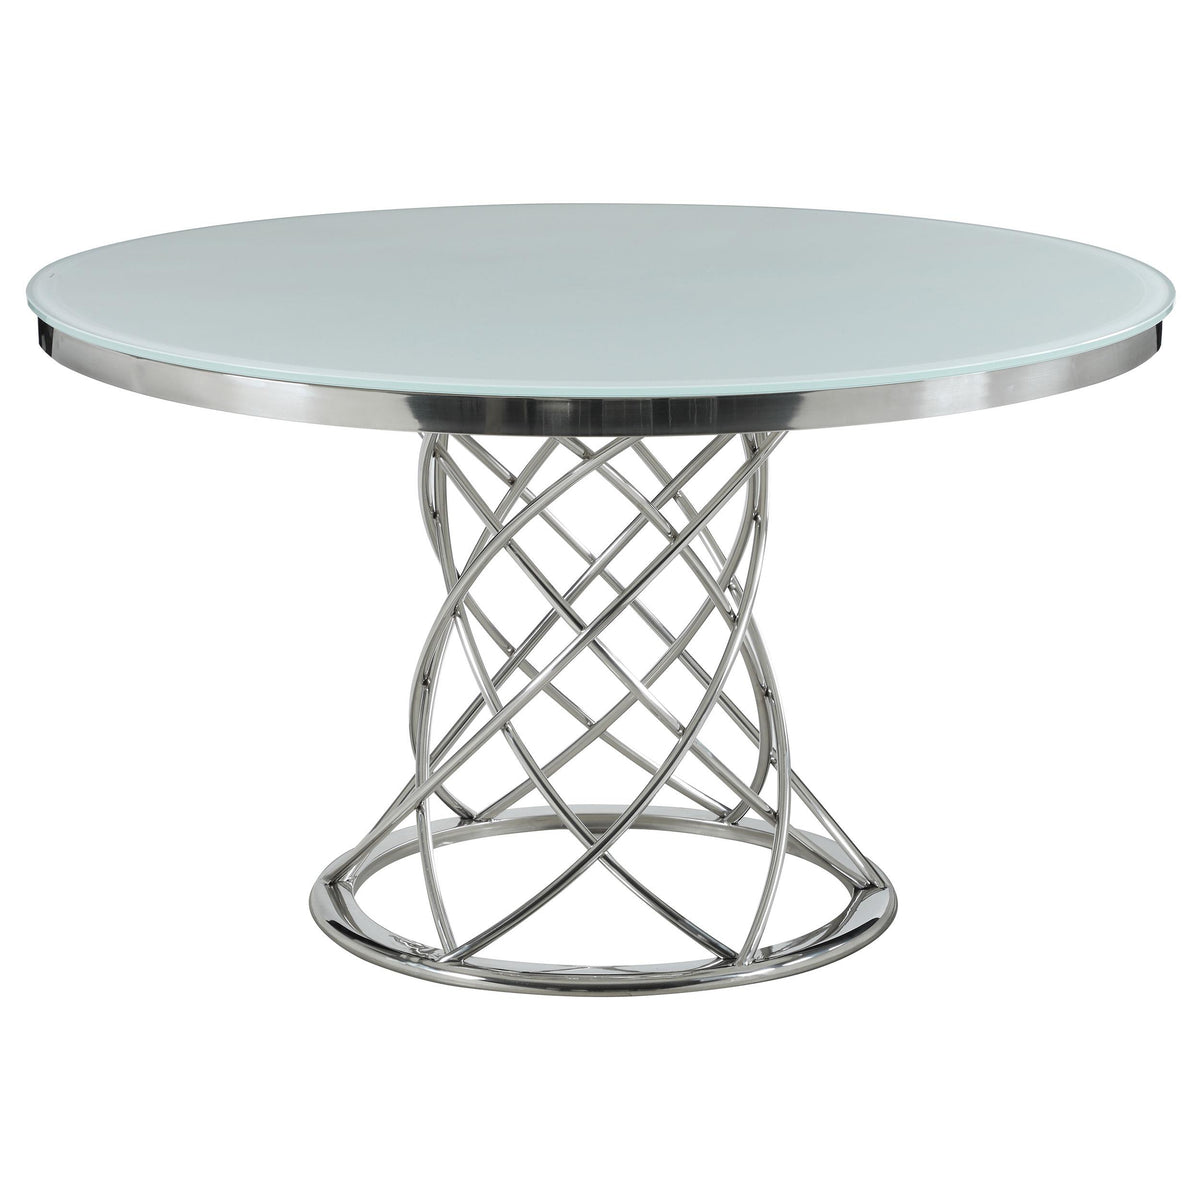 Irene Round Glass Top Dining Table White and Chrome Irene Round Glass Top Dining Table White and Chrome Half Price Furniture